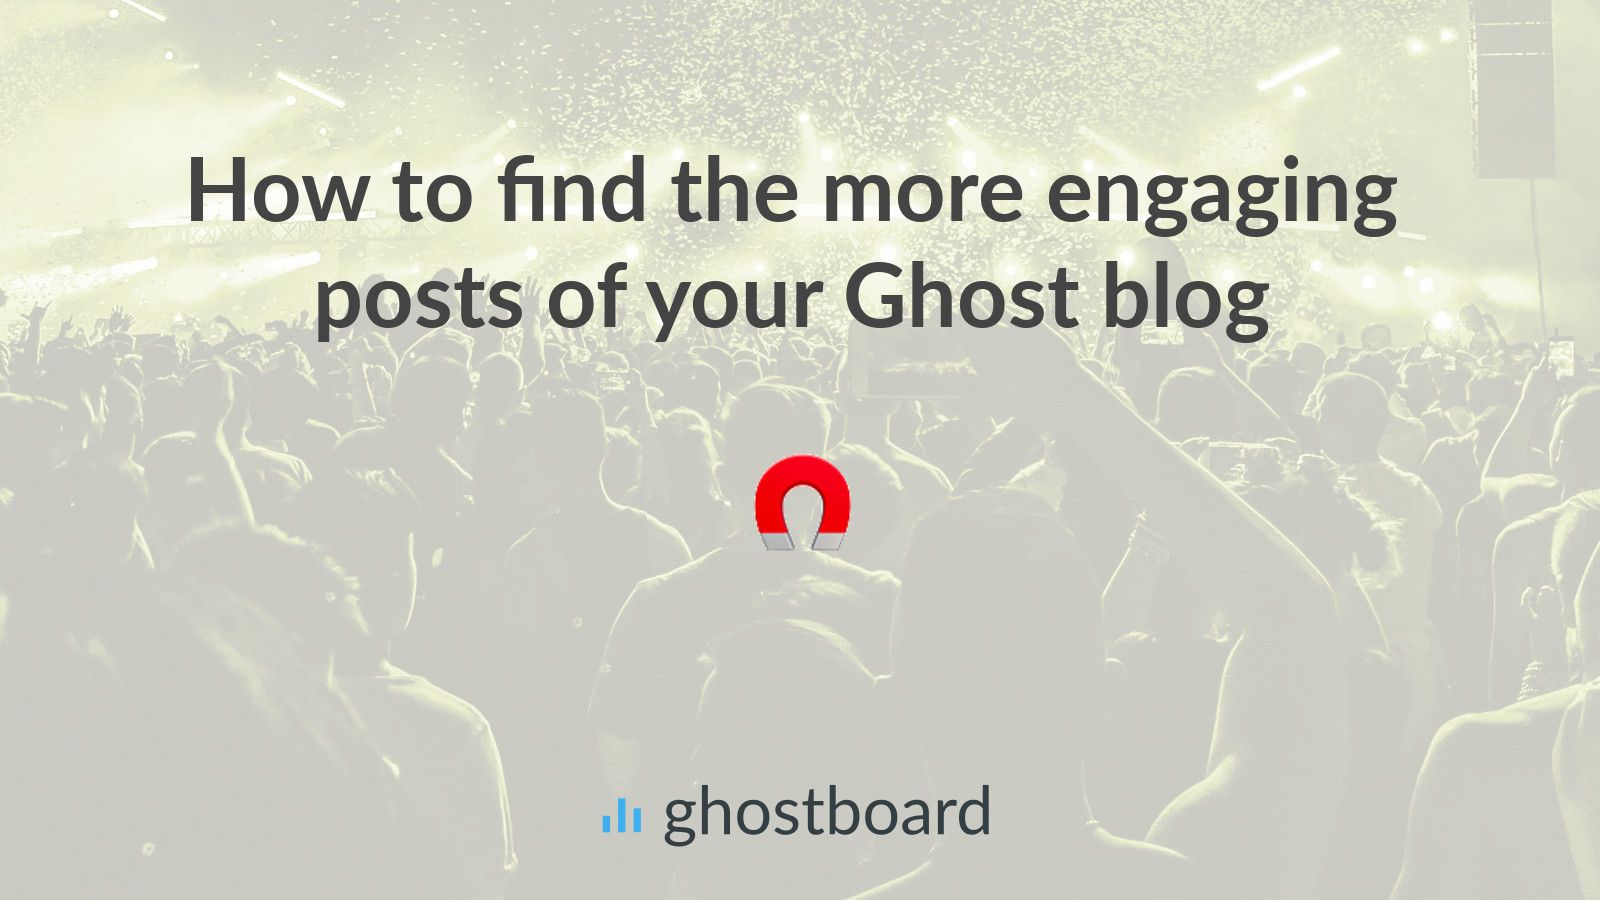 How to find the more engaging posts in your Ghost blog